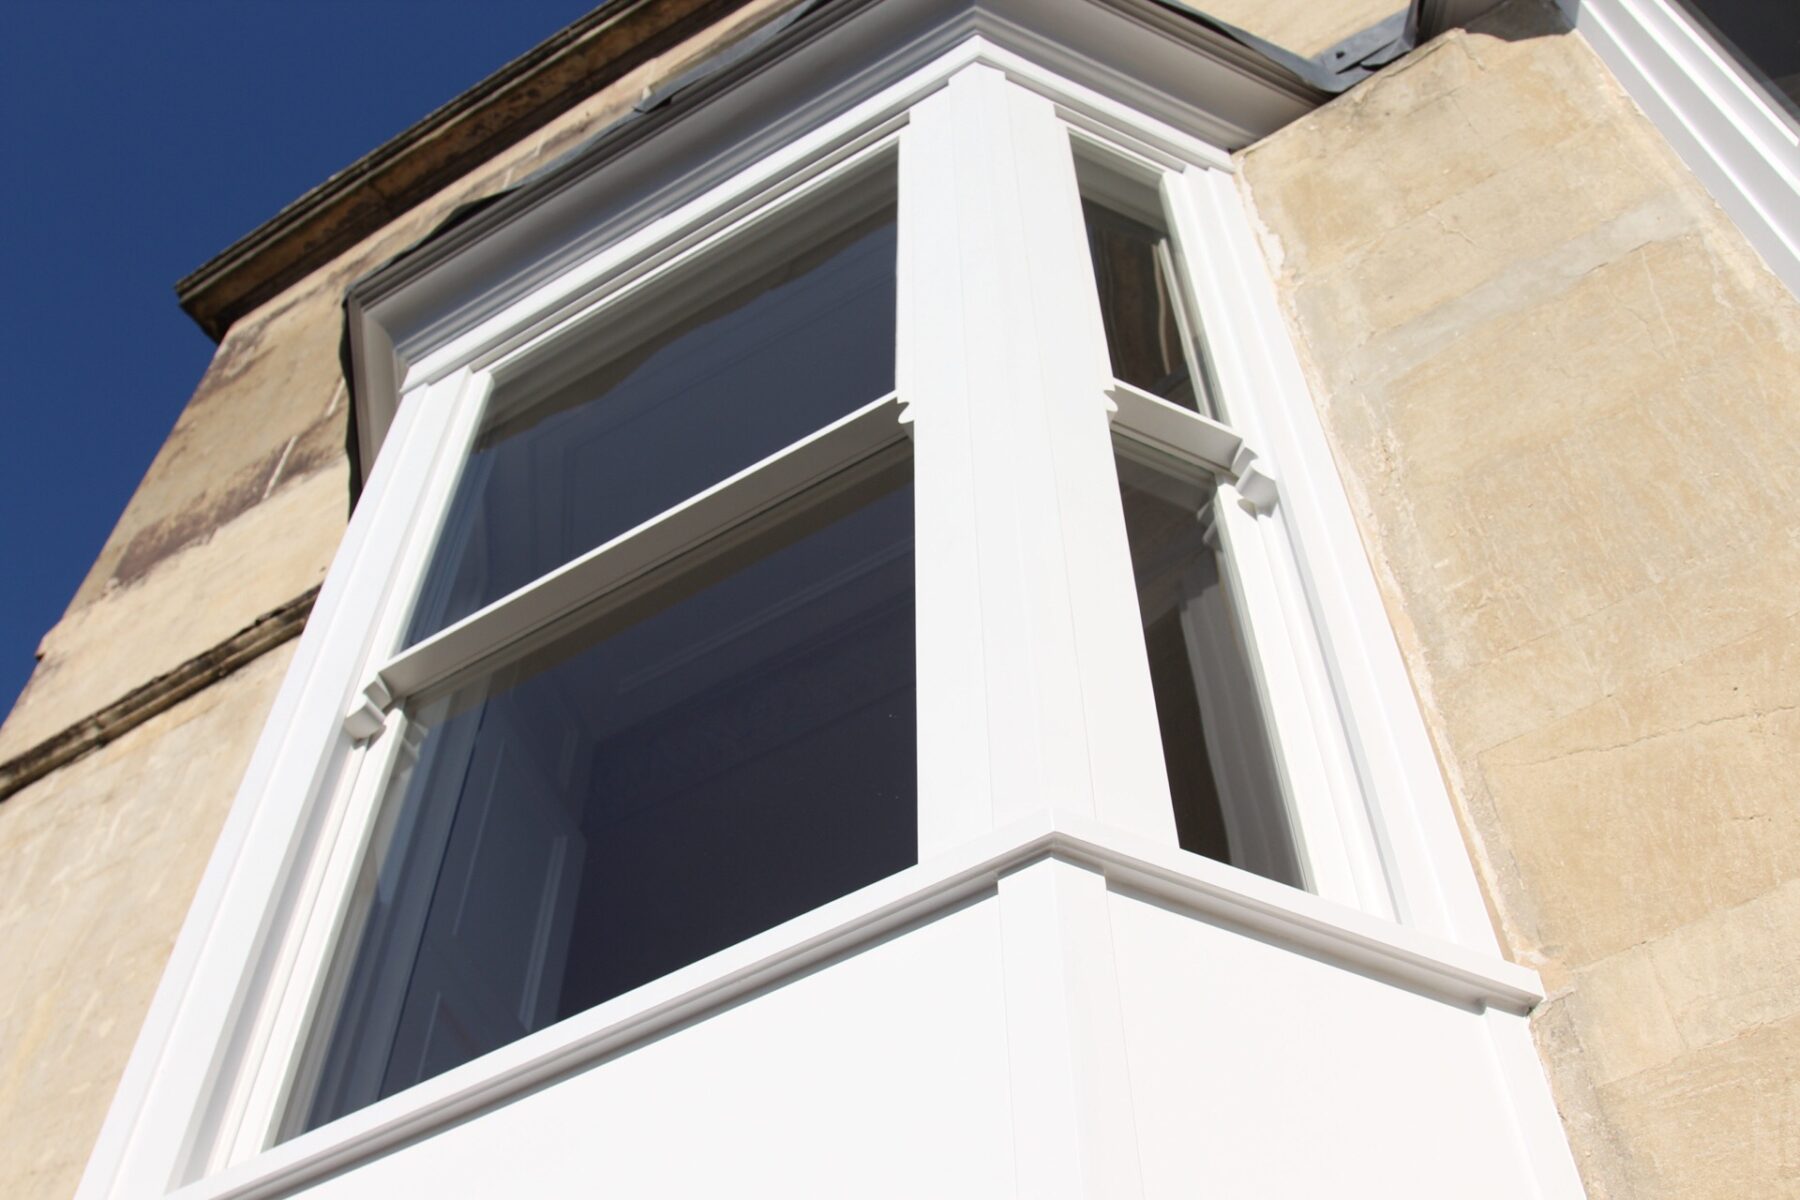 Sash window with acoustic glass